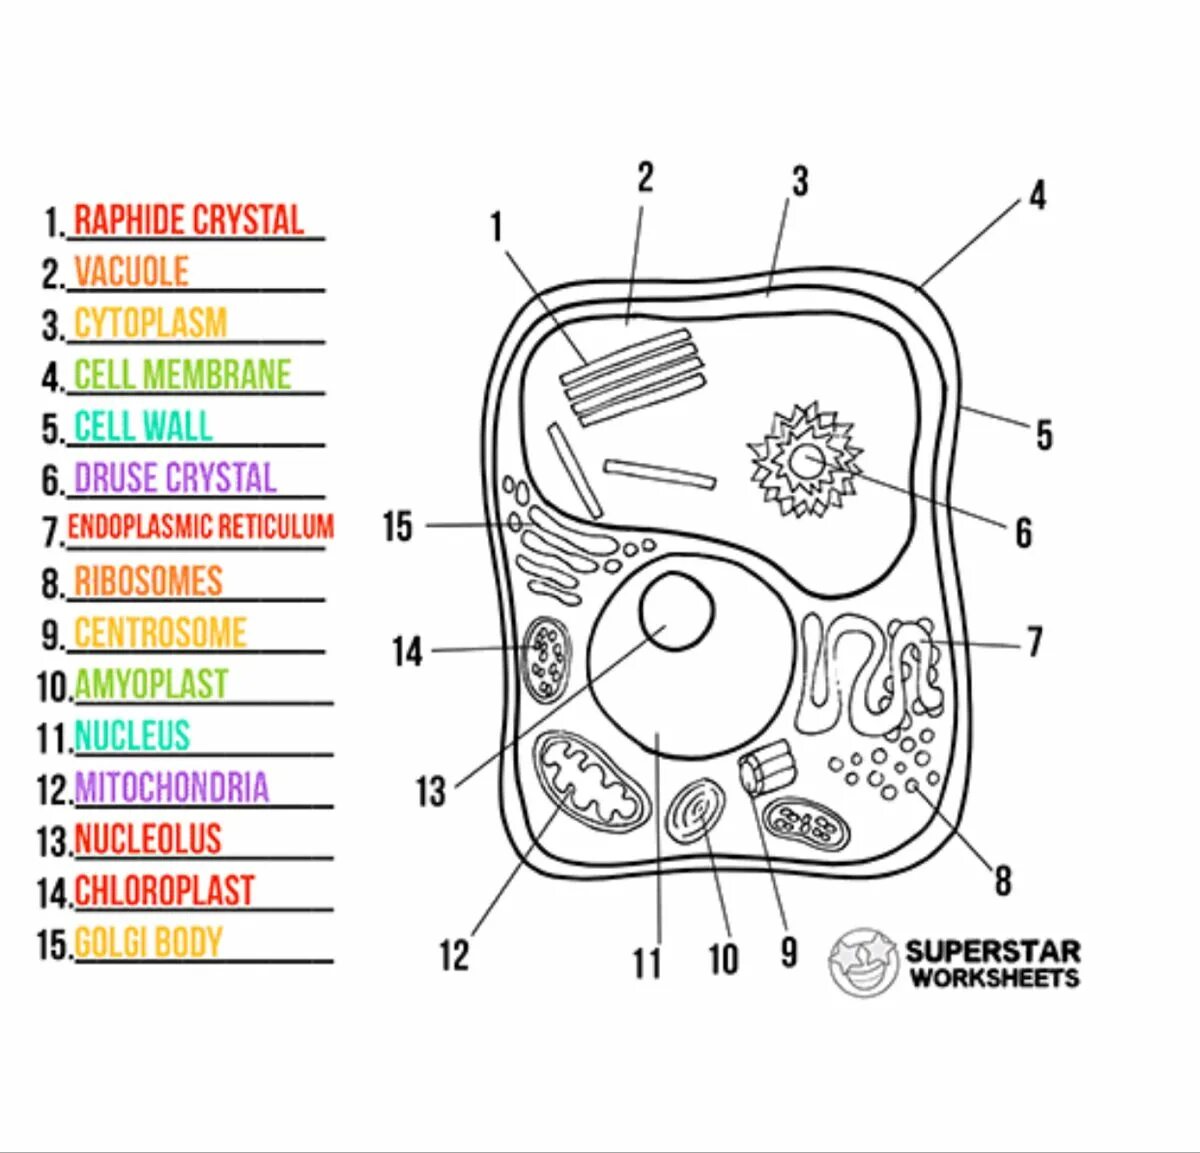 Coloring the complex structure of a plant cell